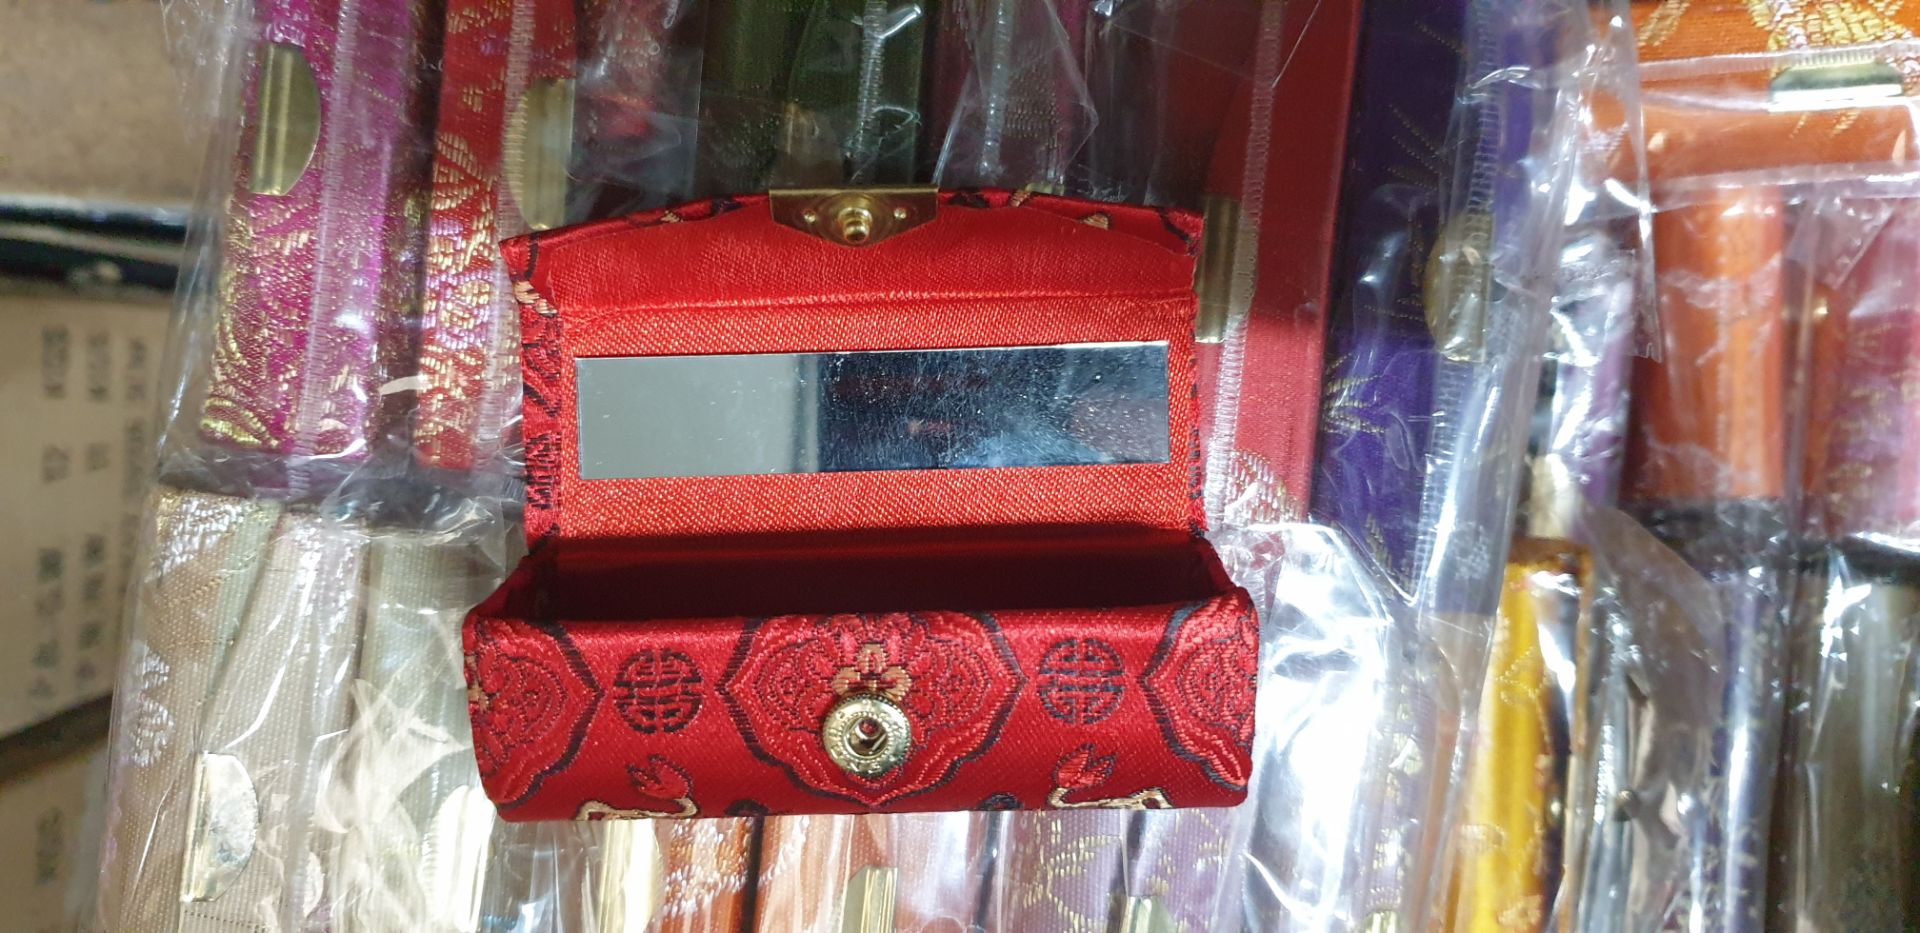 Approx. 360 assorted small decorative lipstick boxes each with a mirror in the lid, covered in a var